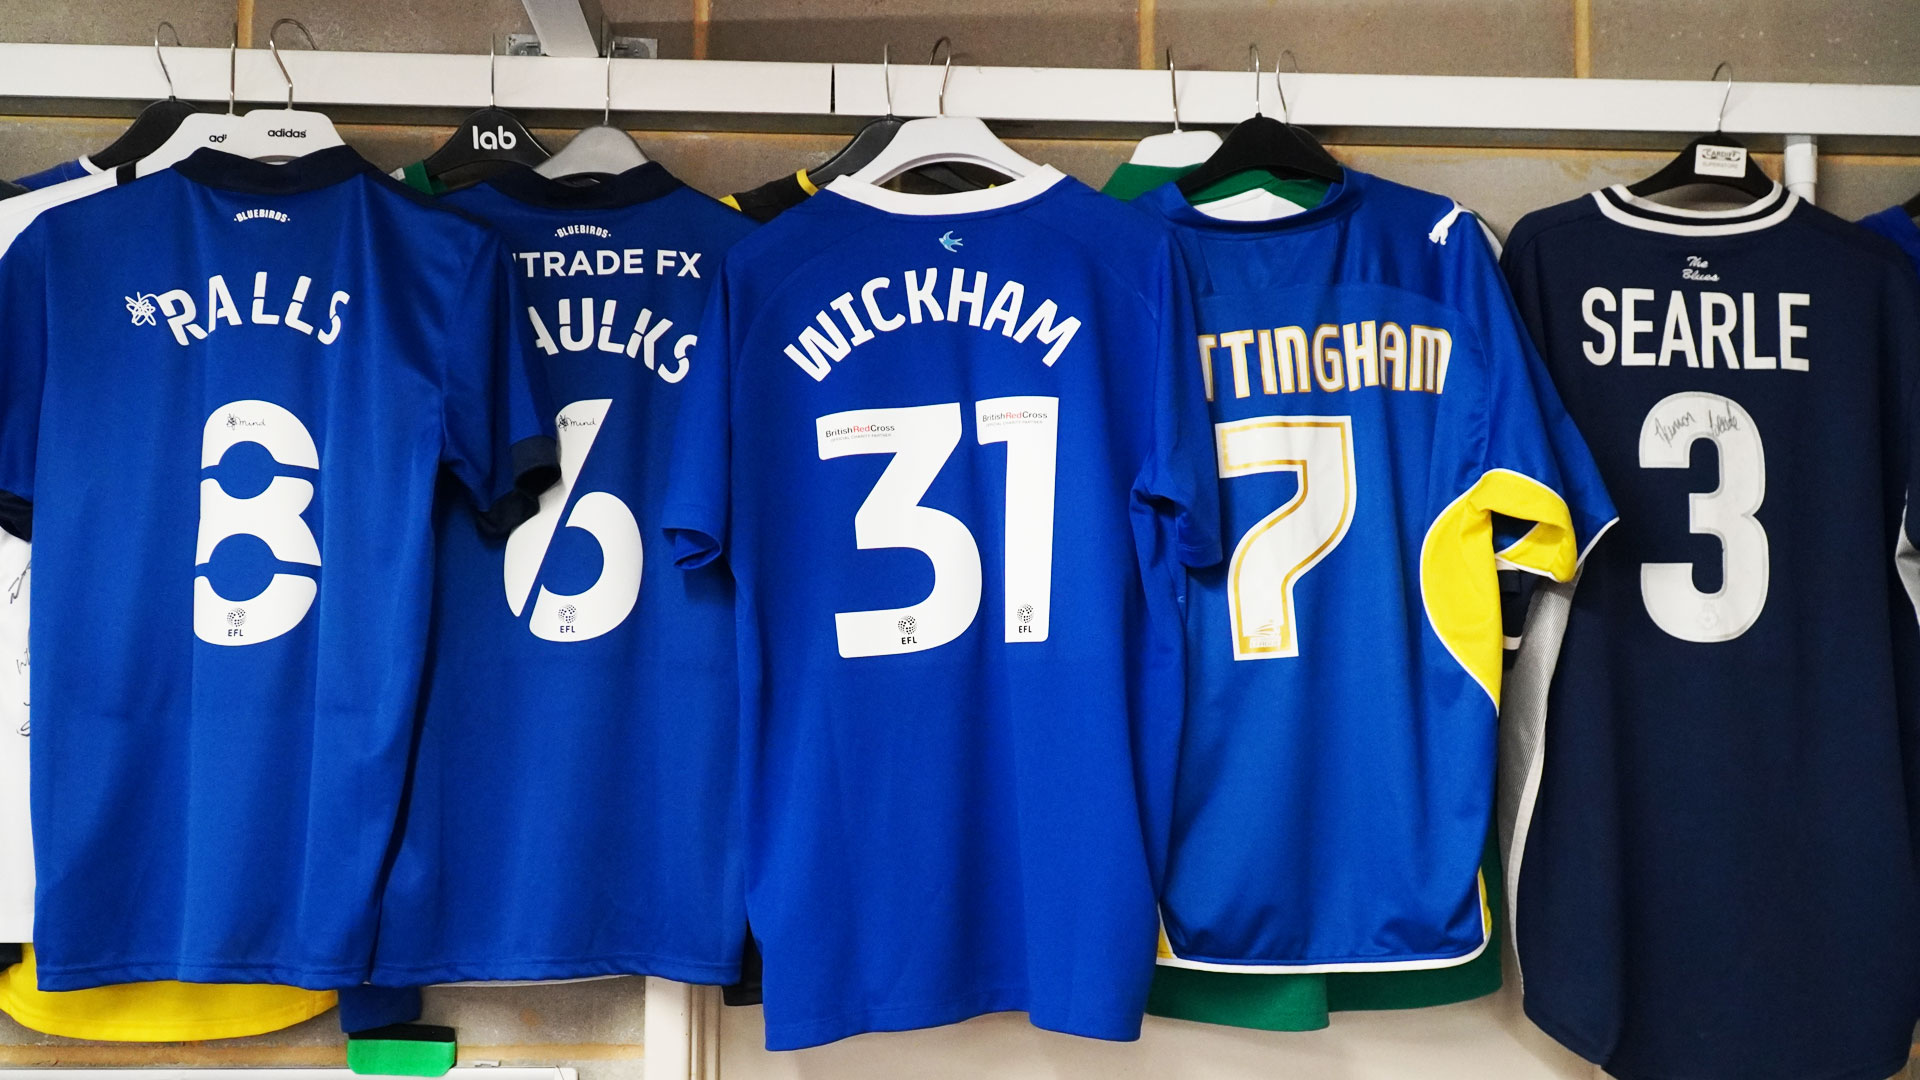 Connor Wickham's shirt hangs up in the Laundry Room at CCS...